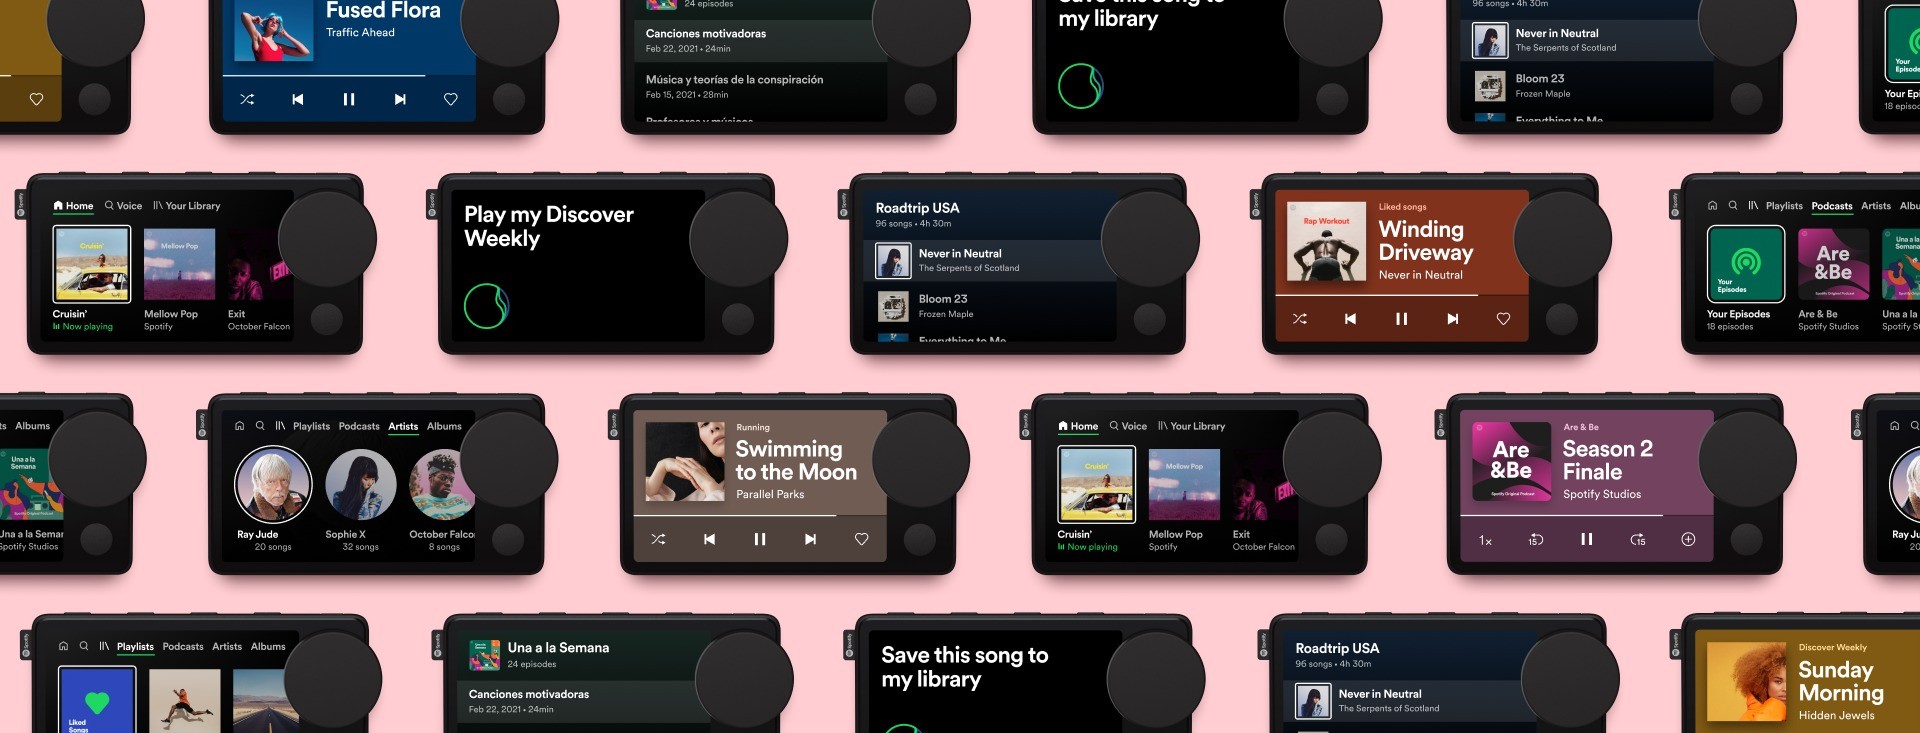 Spotify Launches “Hey, Spotify” and It All Makes Sense Now